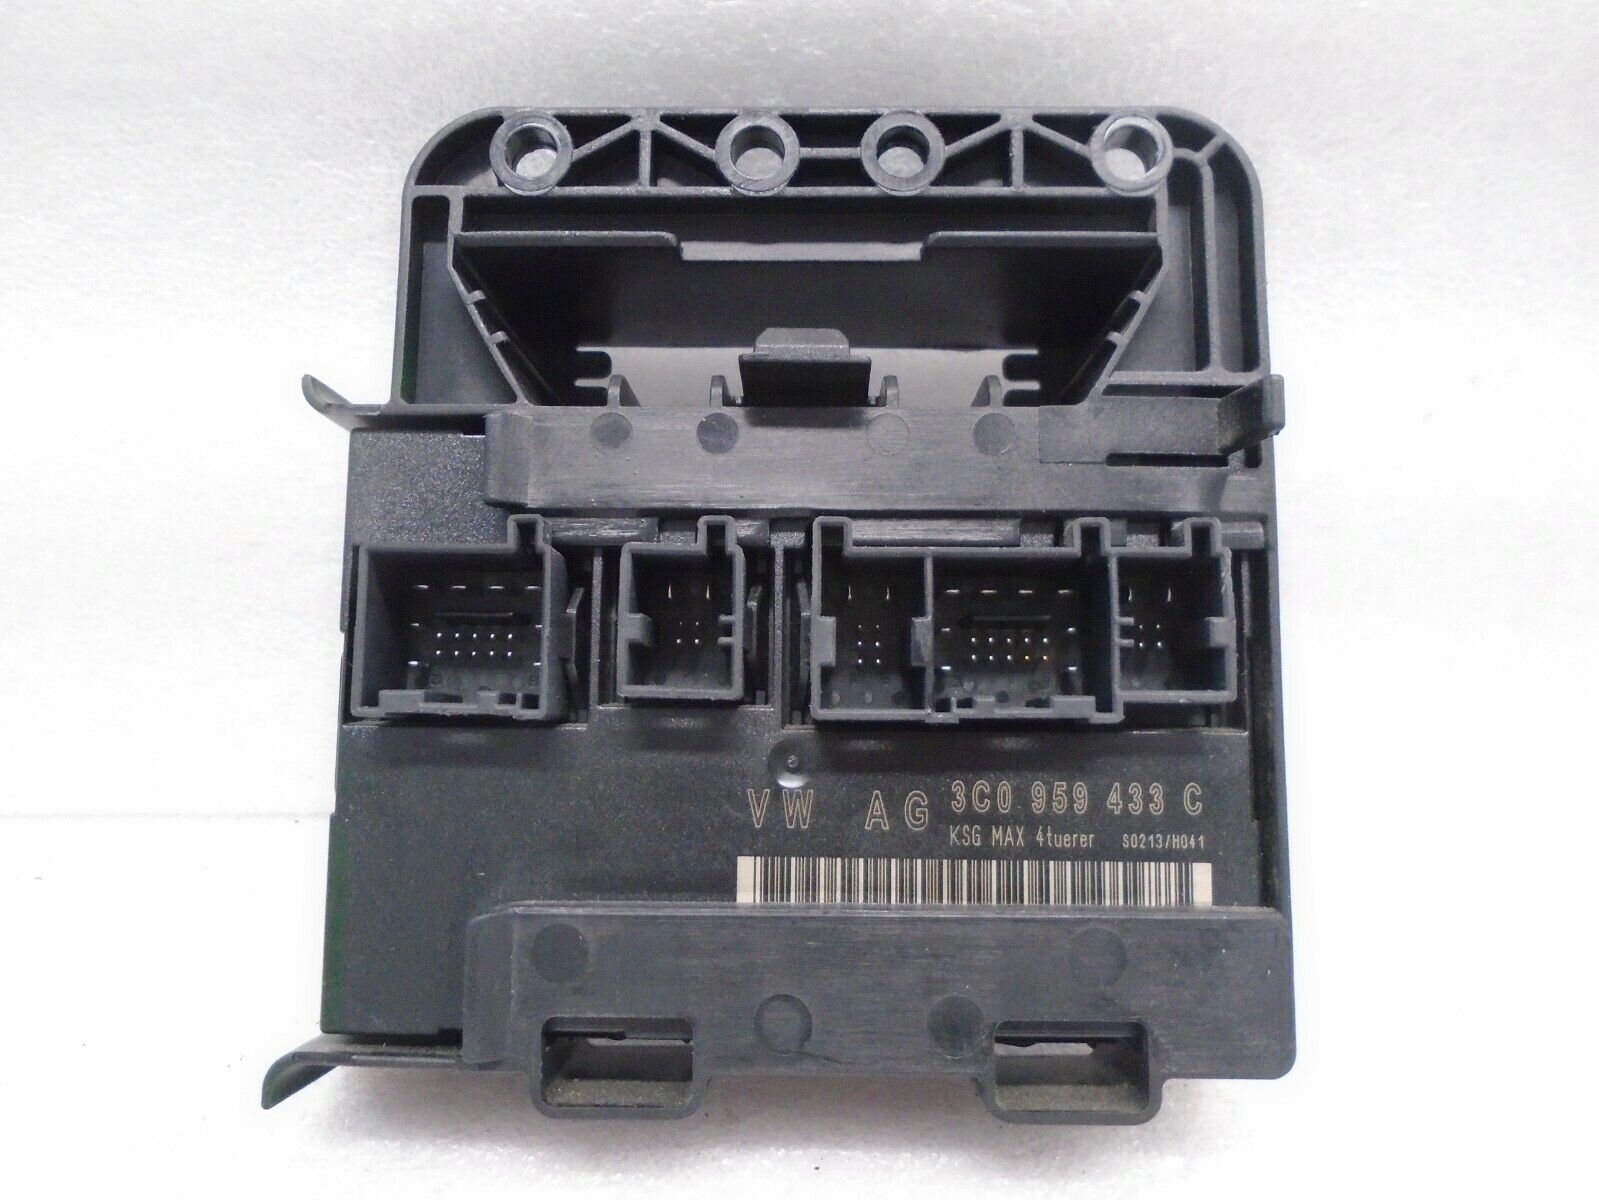 Shipping included DK905194 2006-2008 VOLKSWAGEN PASSAT MODULE Now on sale COMPUTER ANTI THEFT